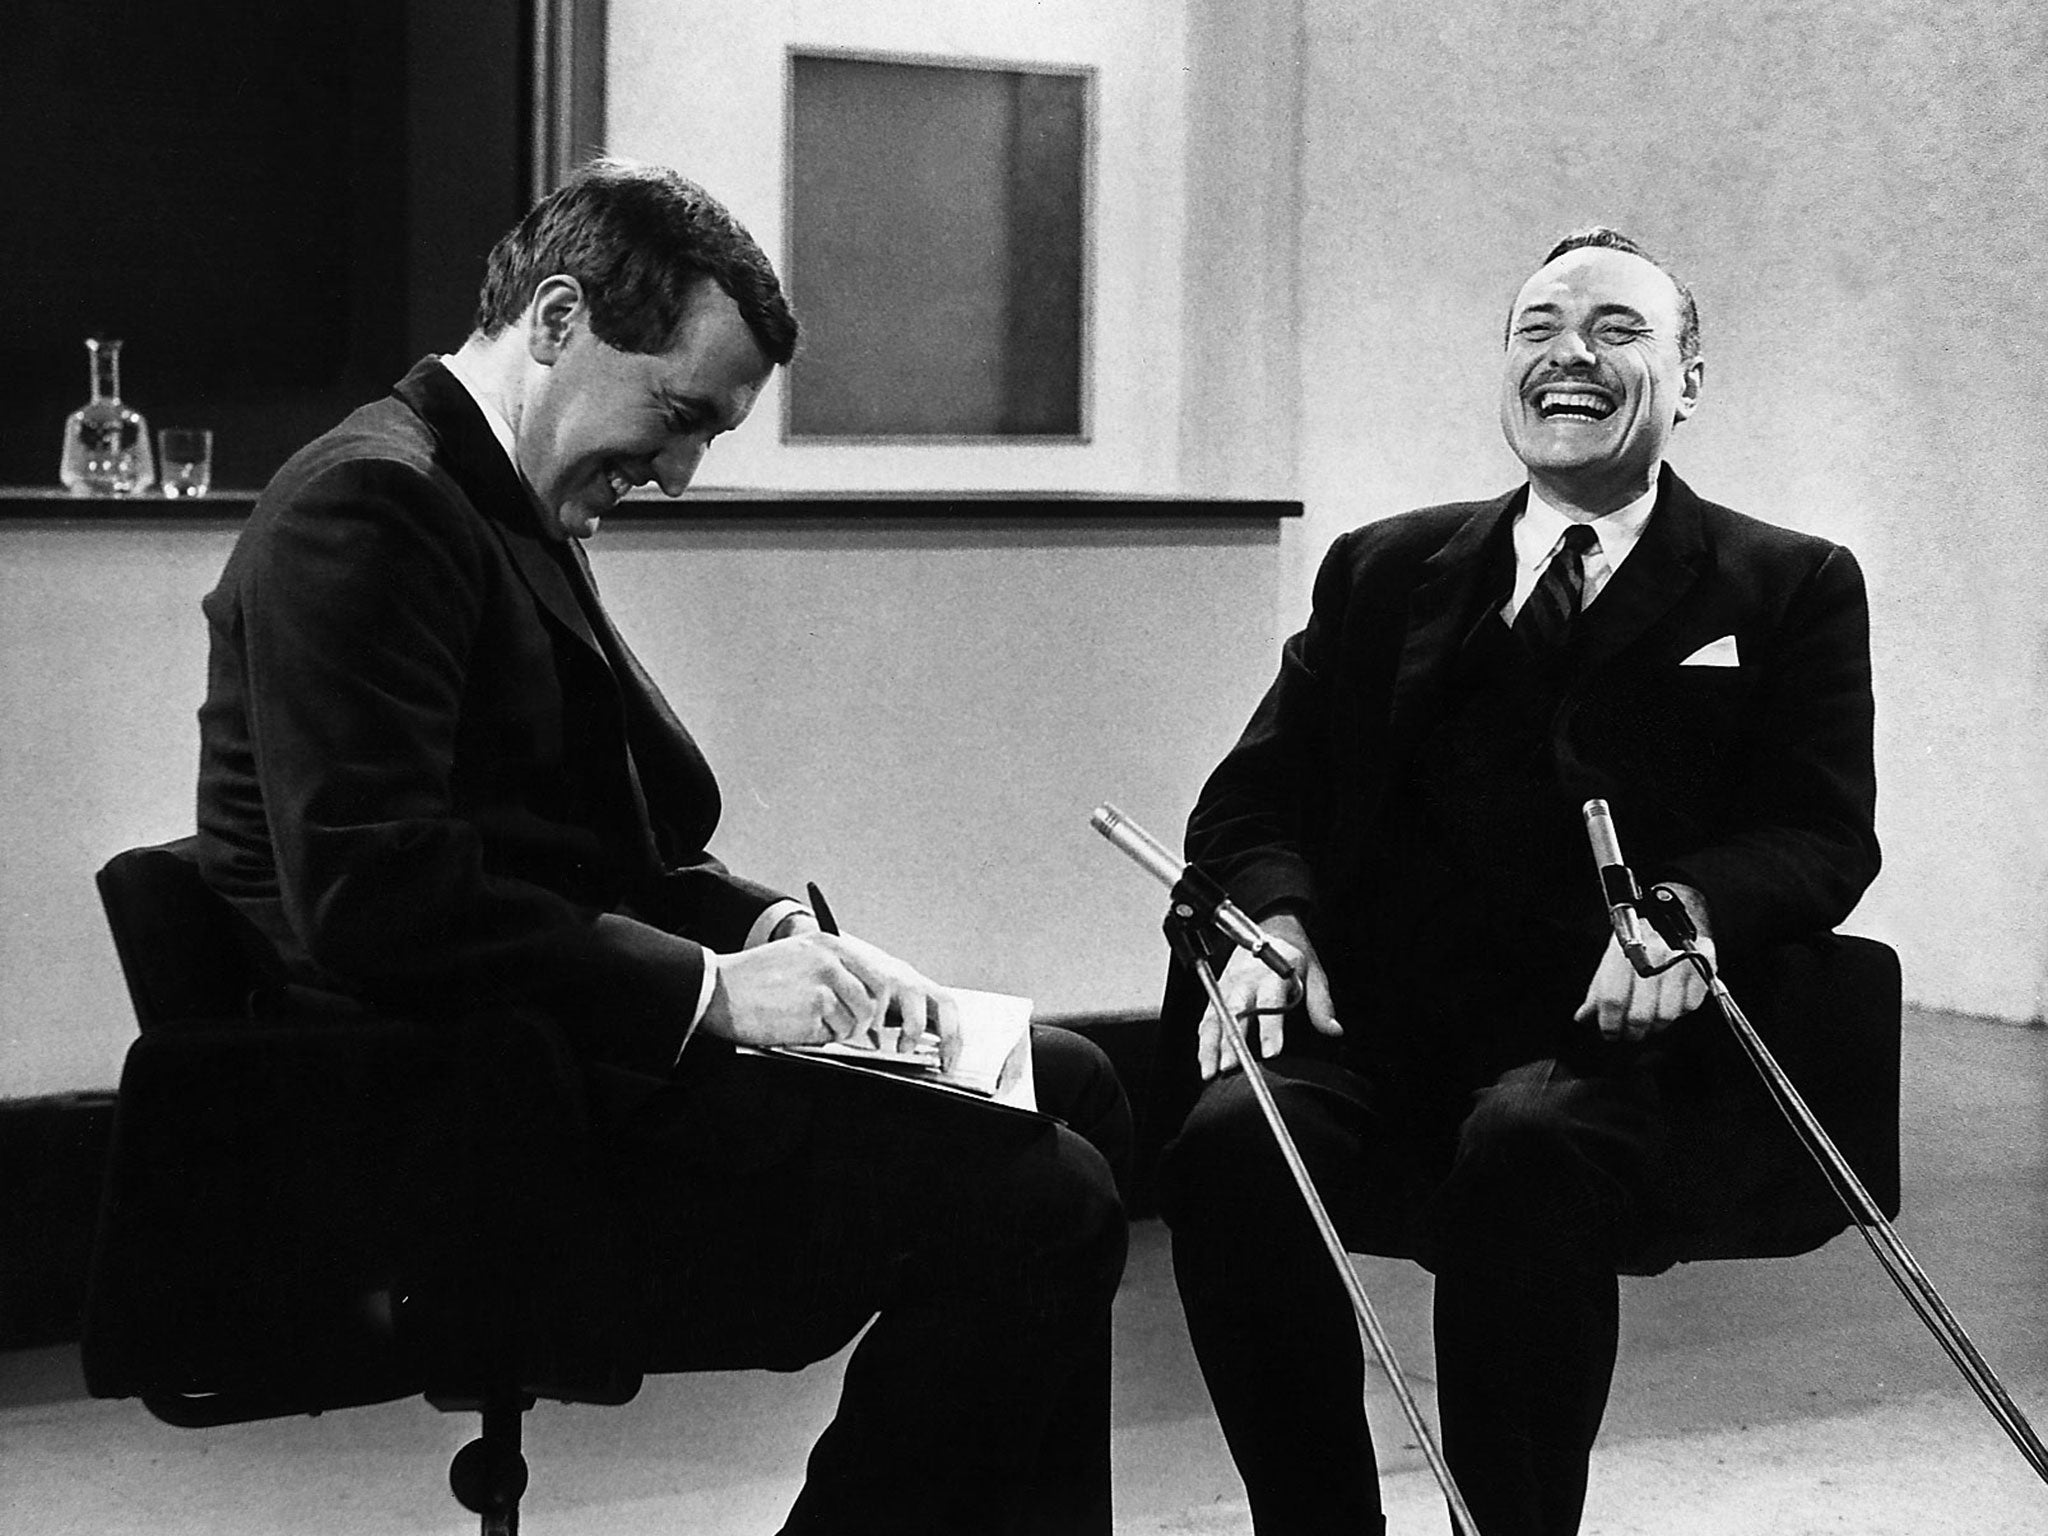 Giant wave of energy: David Frost, left, with Enoch Powell